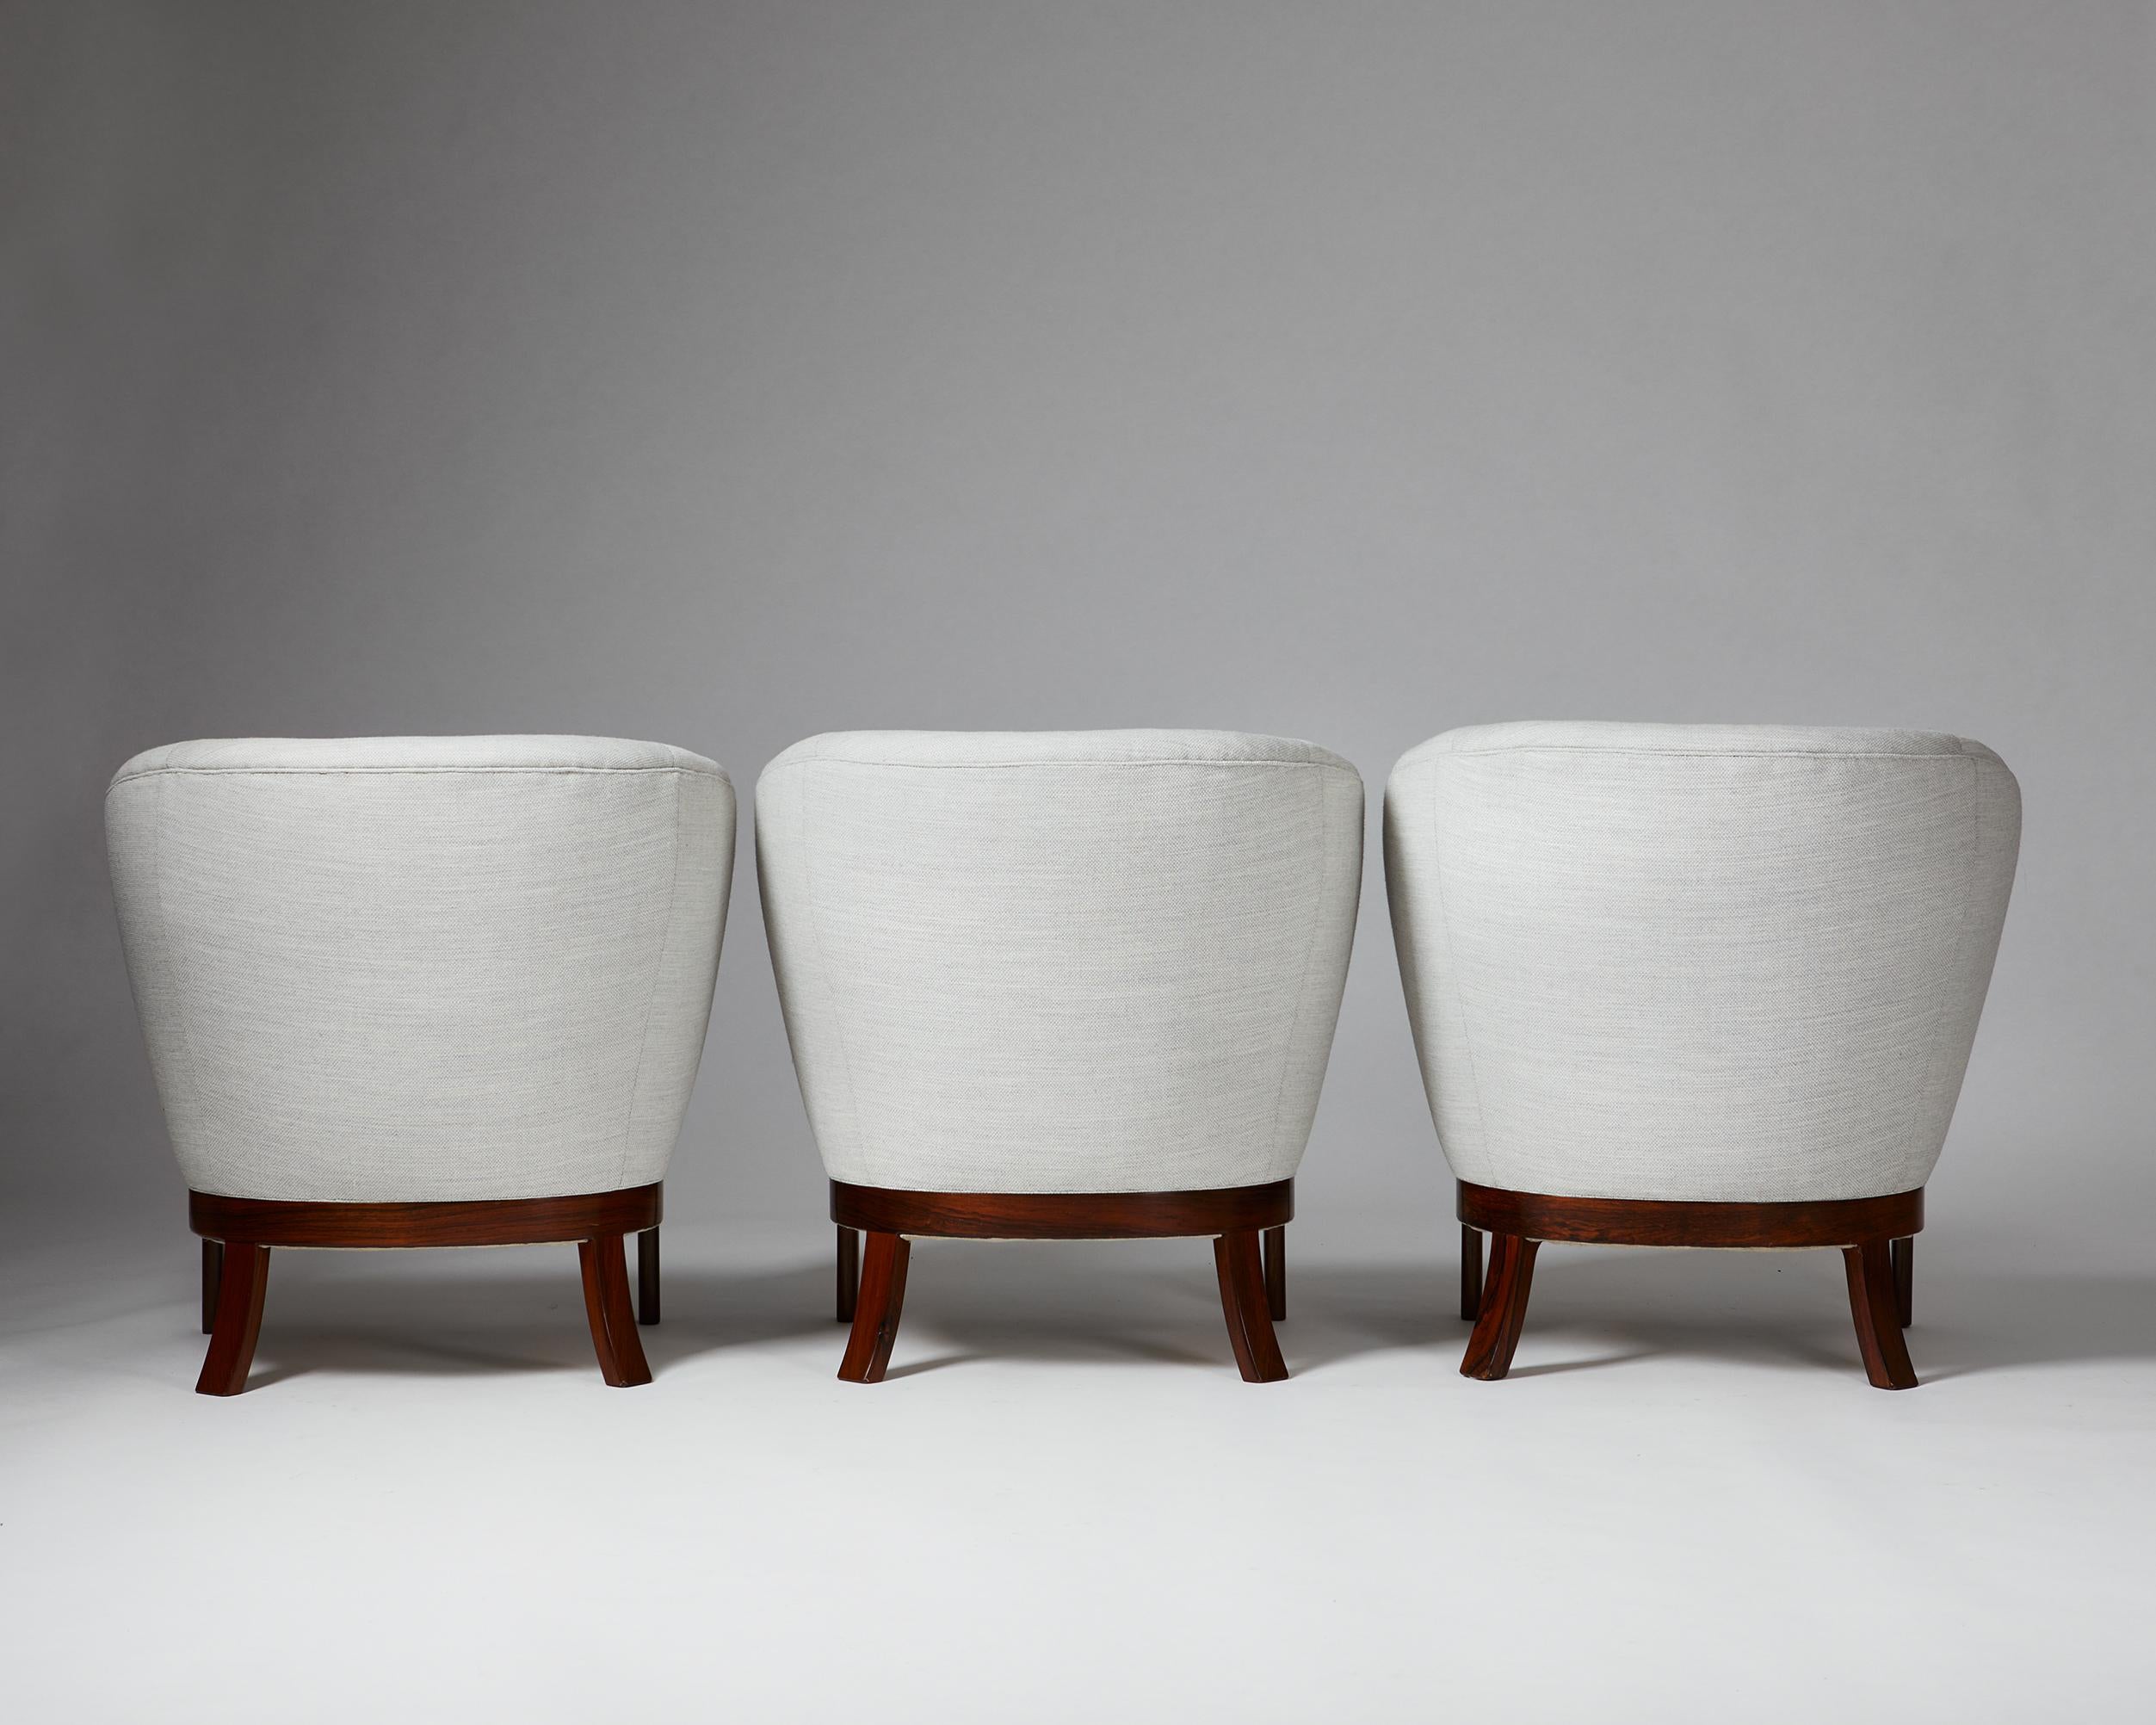 Danish Set of Three Unique Easy Chairs Designed by Frits Schlegel, Denmark, 1949 For Sale